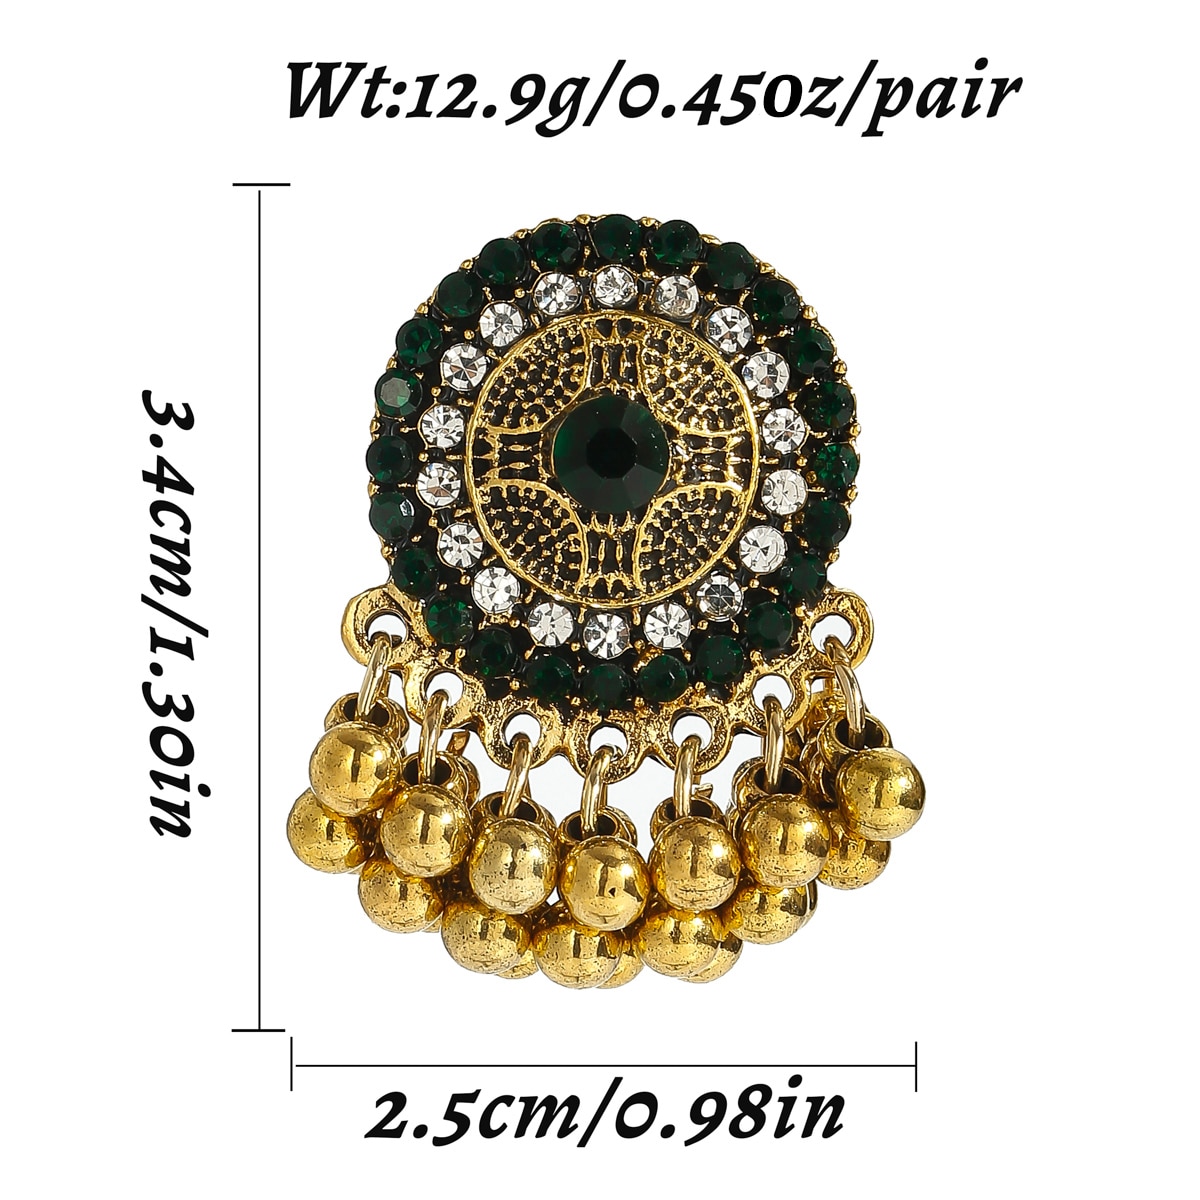 Classic-Ethnic-CZ-Indian-Earrings-For-Women-Gypsy-Round-Alloy-Jhumka-Earring-Fashion-Jewelry-Orecchi-1005004770706519-7